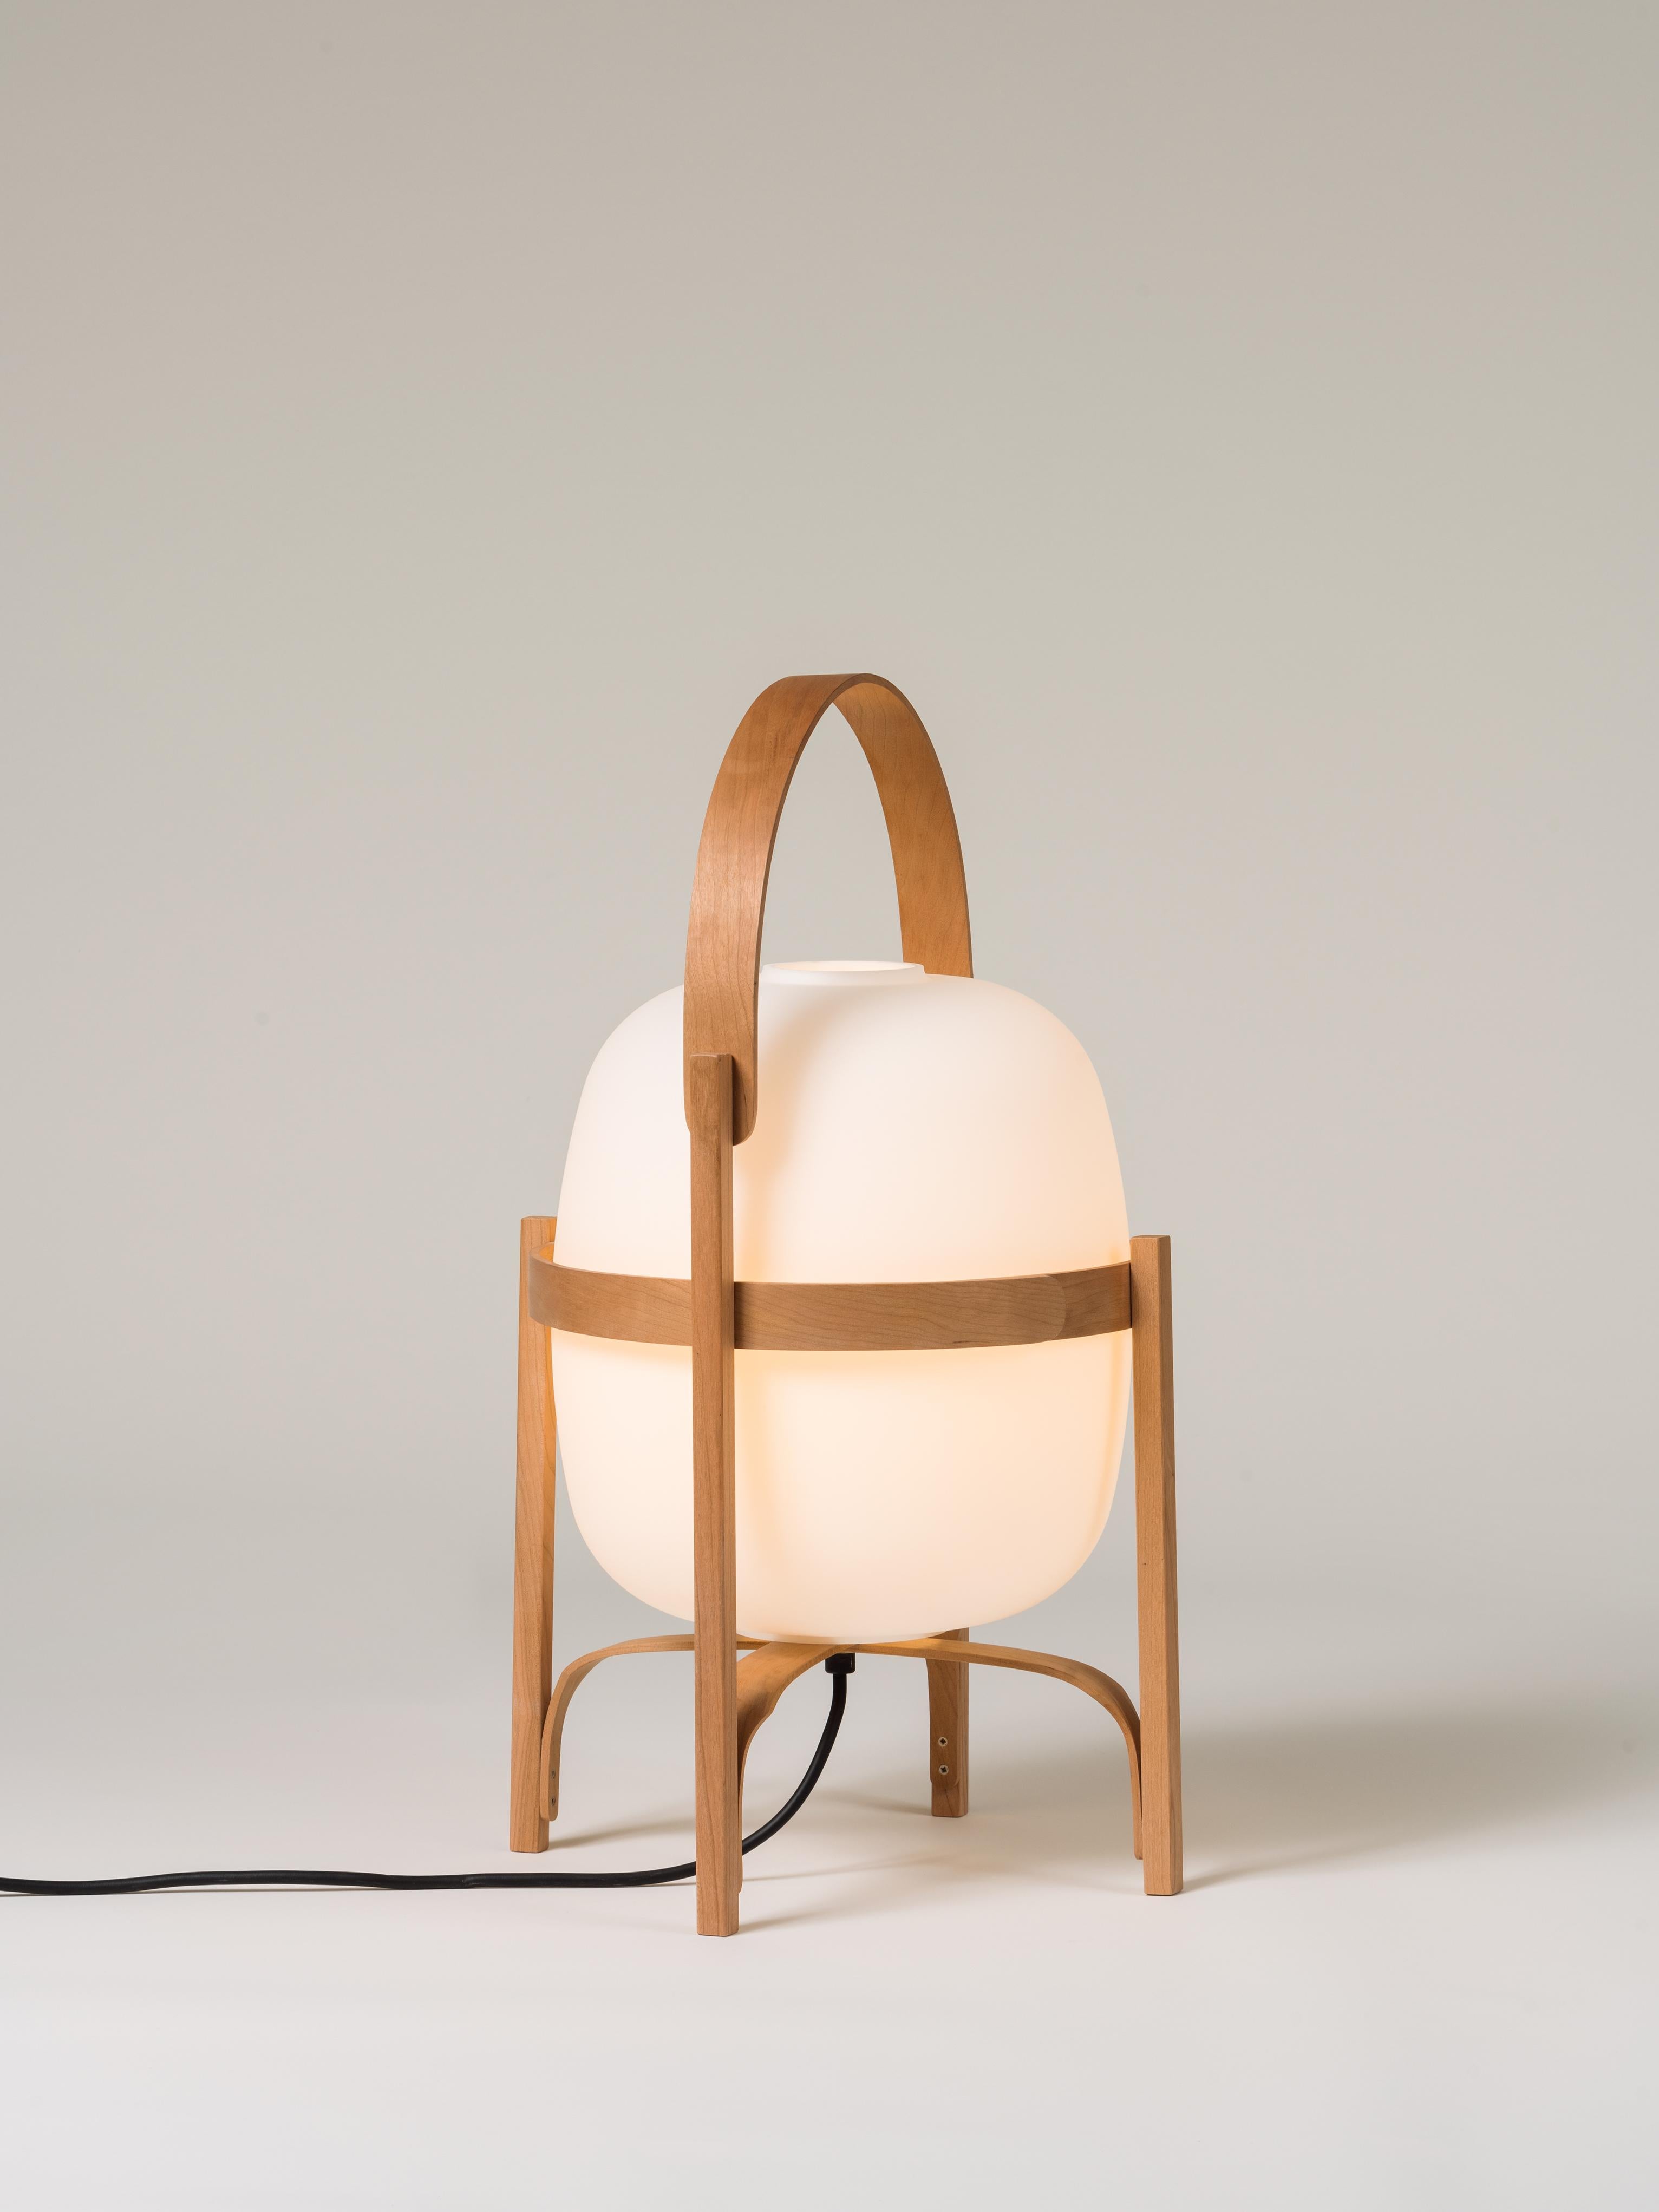 Cesta table lamp by Miguel Milá
Dimensions: D 33 x H 57 cm
Materials: Cherry wood, glass.

On a stroll through Barcelona in the 1960s, designer Miguel Milá found an abandoned opal globe outside a glass factory. He took it home, and over the